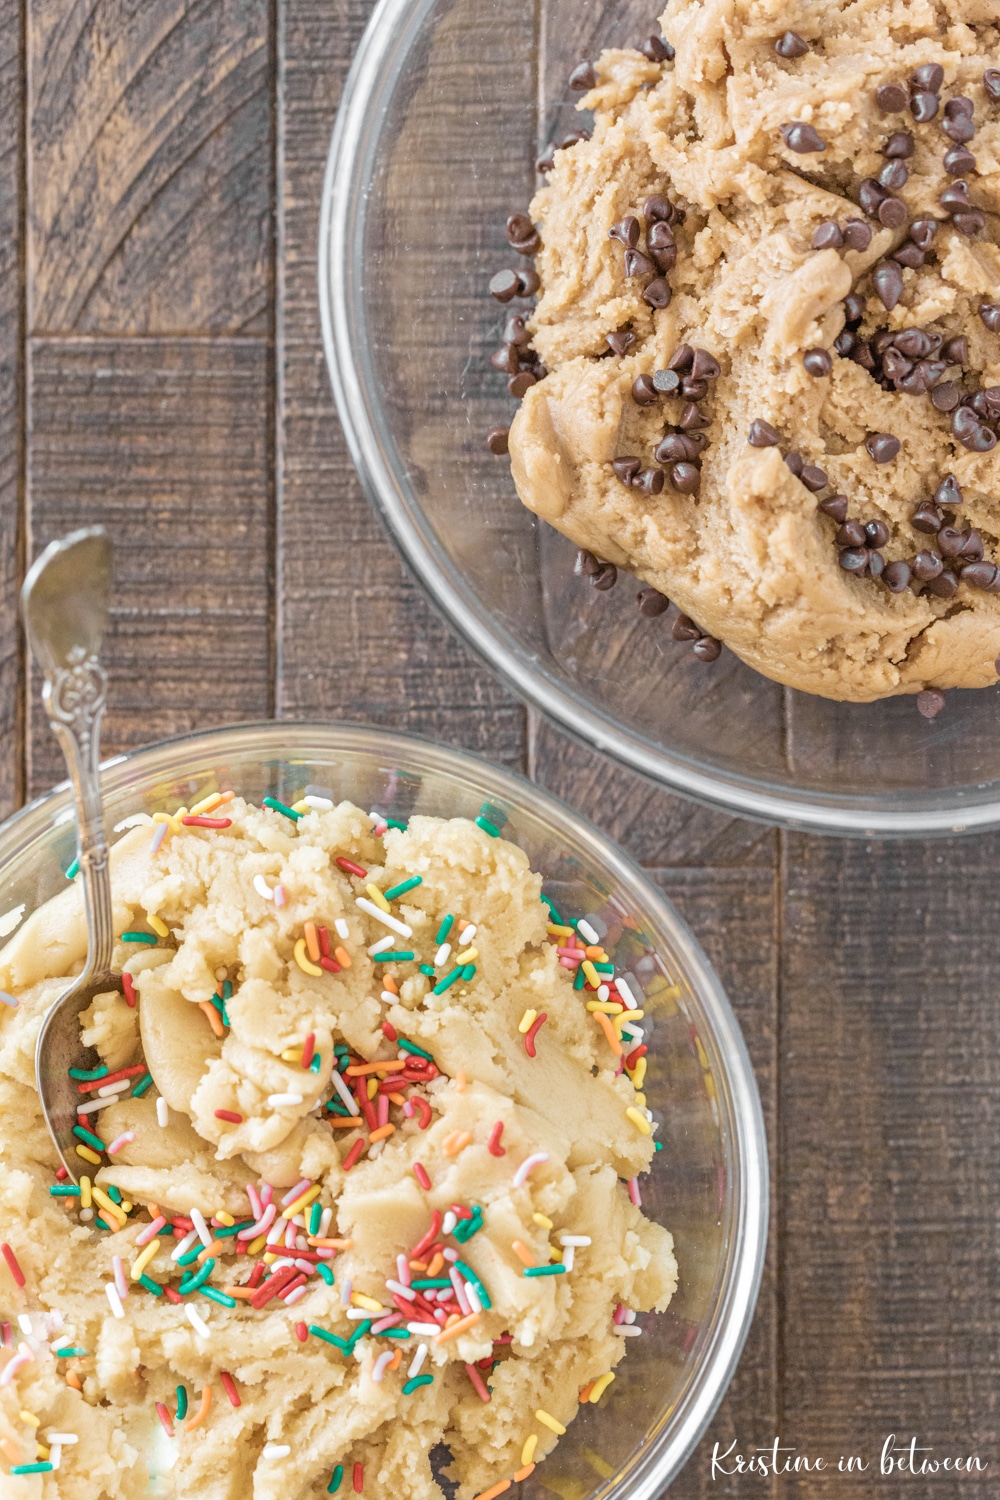 Basic Cookie Dough Recipes To Master